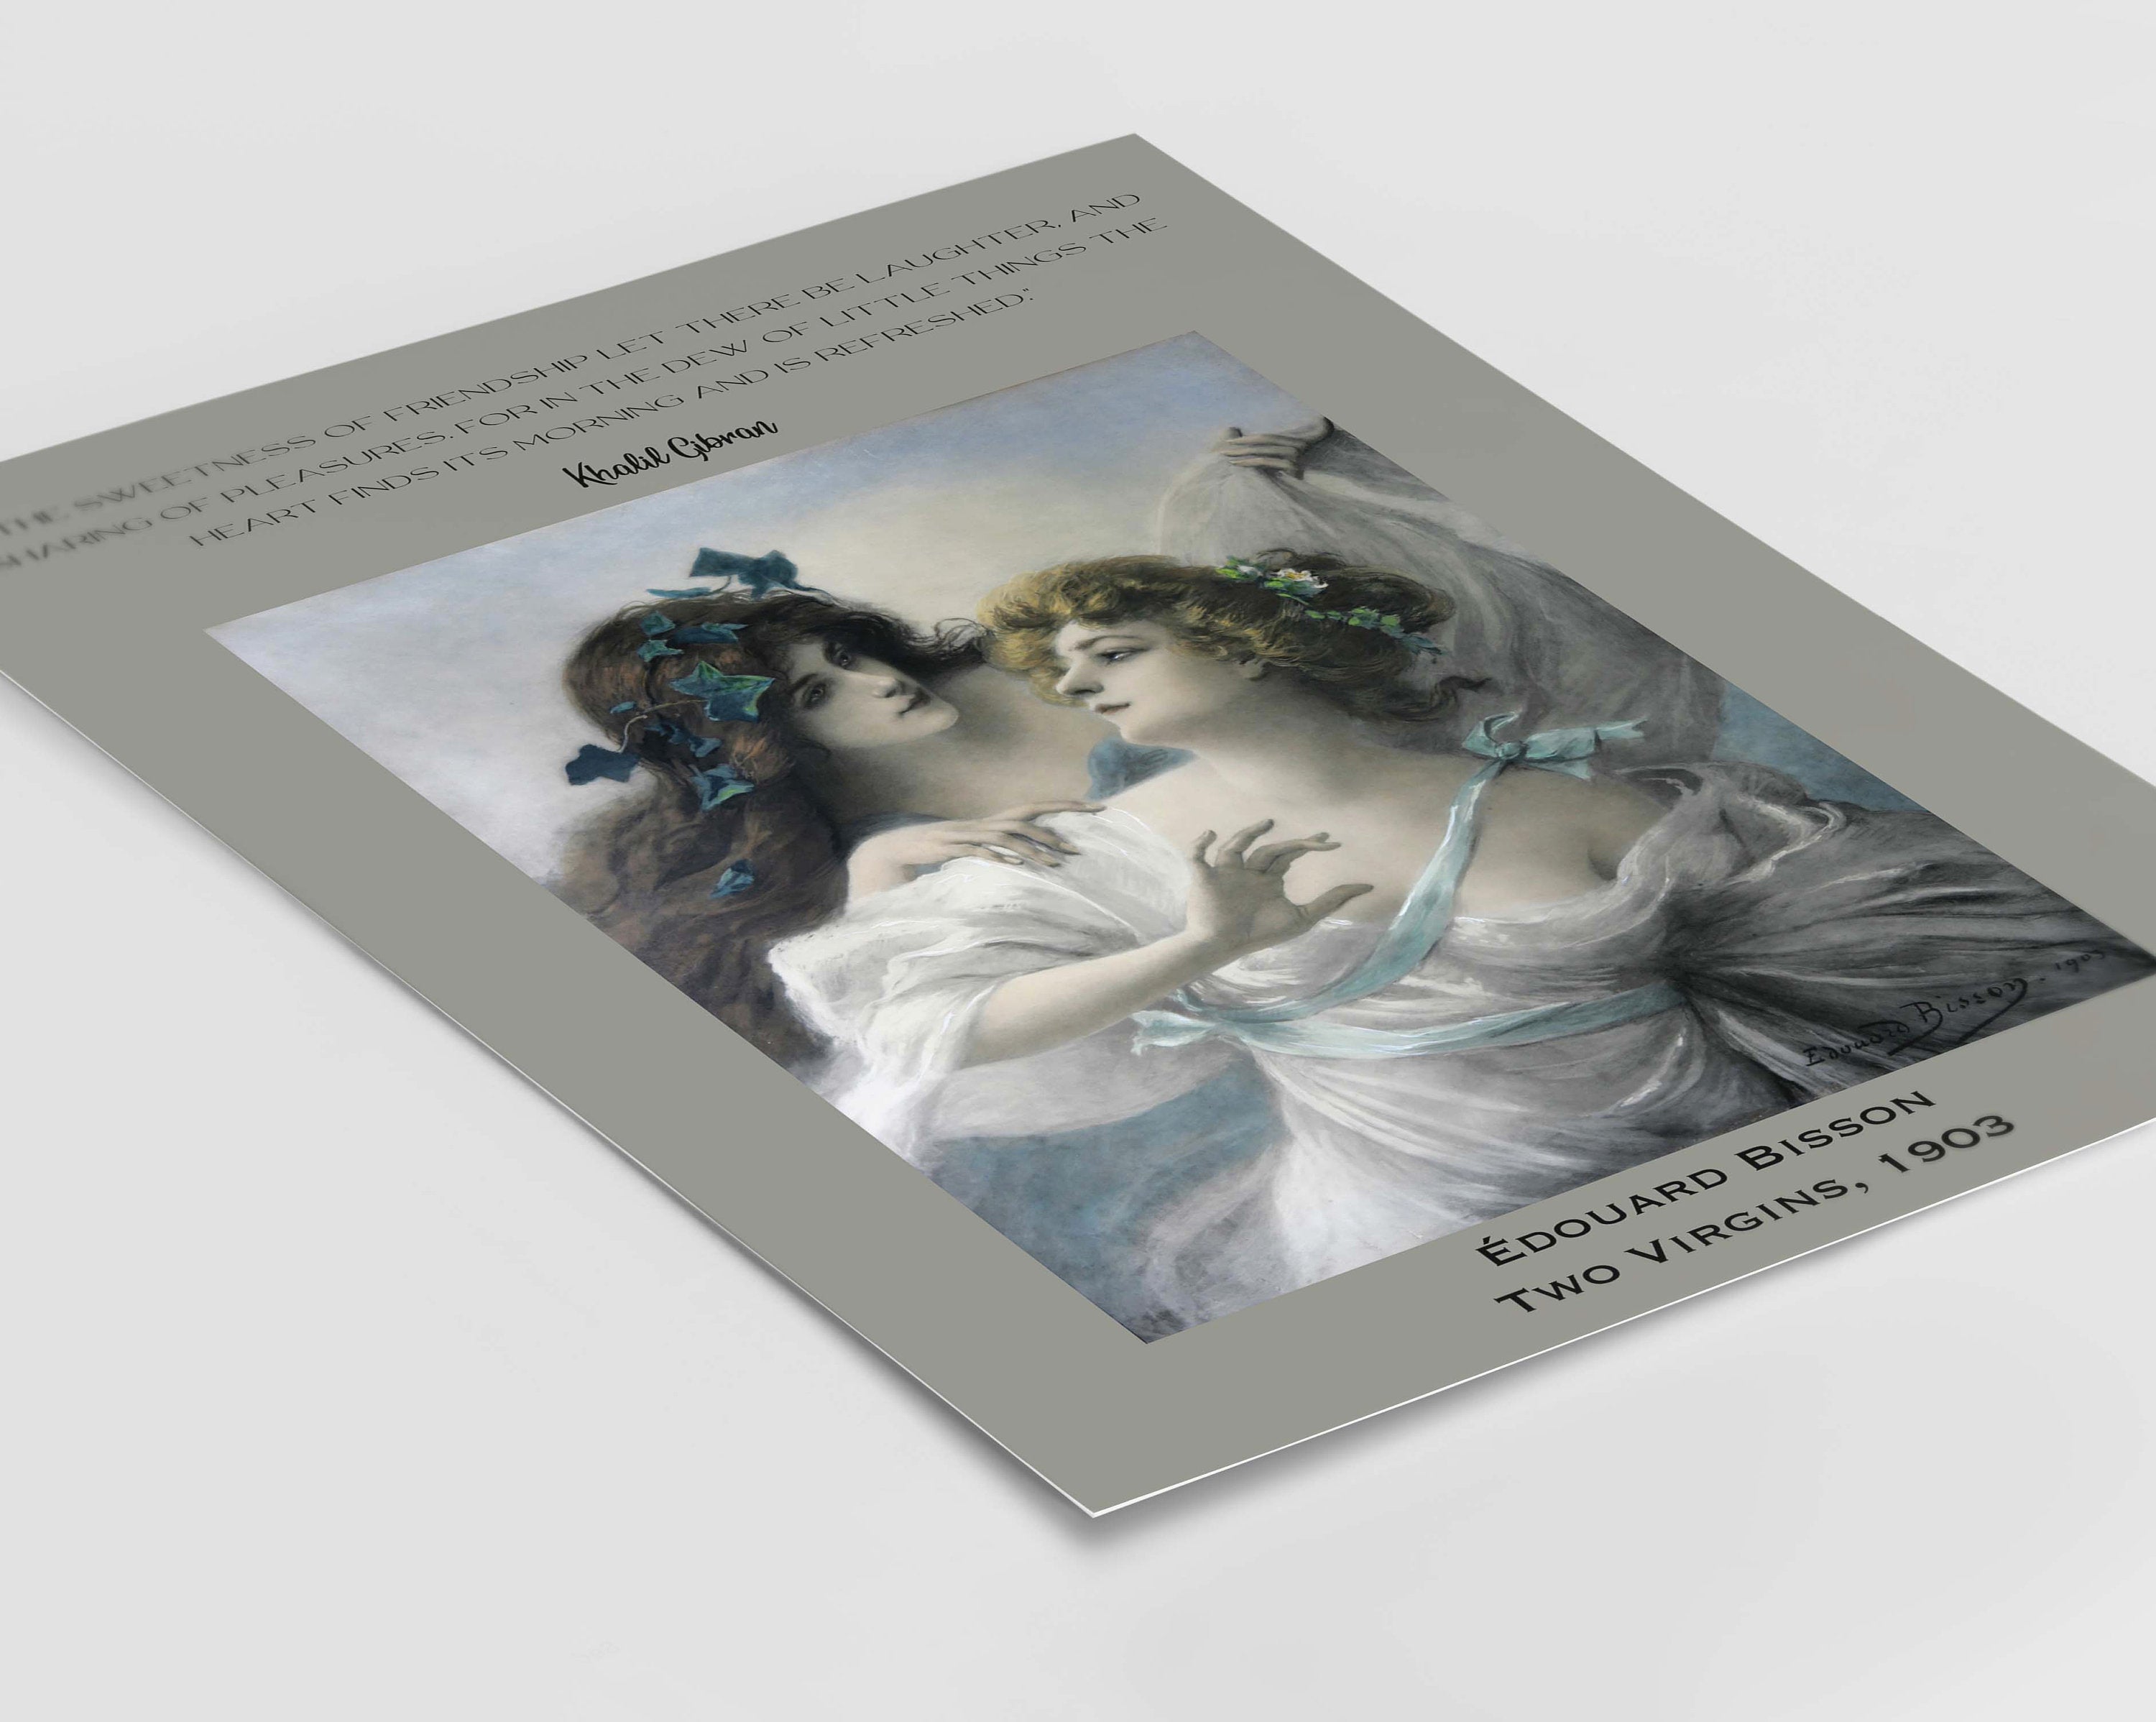 Khalil Gibran Friend Quote, The Prophet Unframed Edouard Bisson Fine Art Print - Two Virgins, In the Sweetness of Friendship